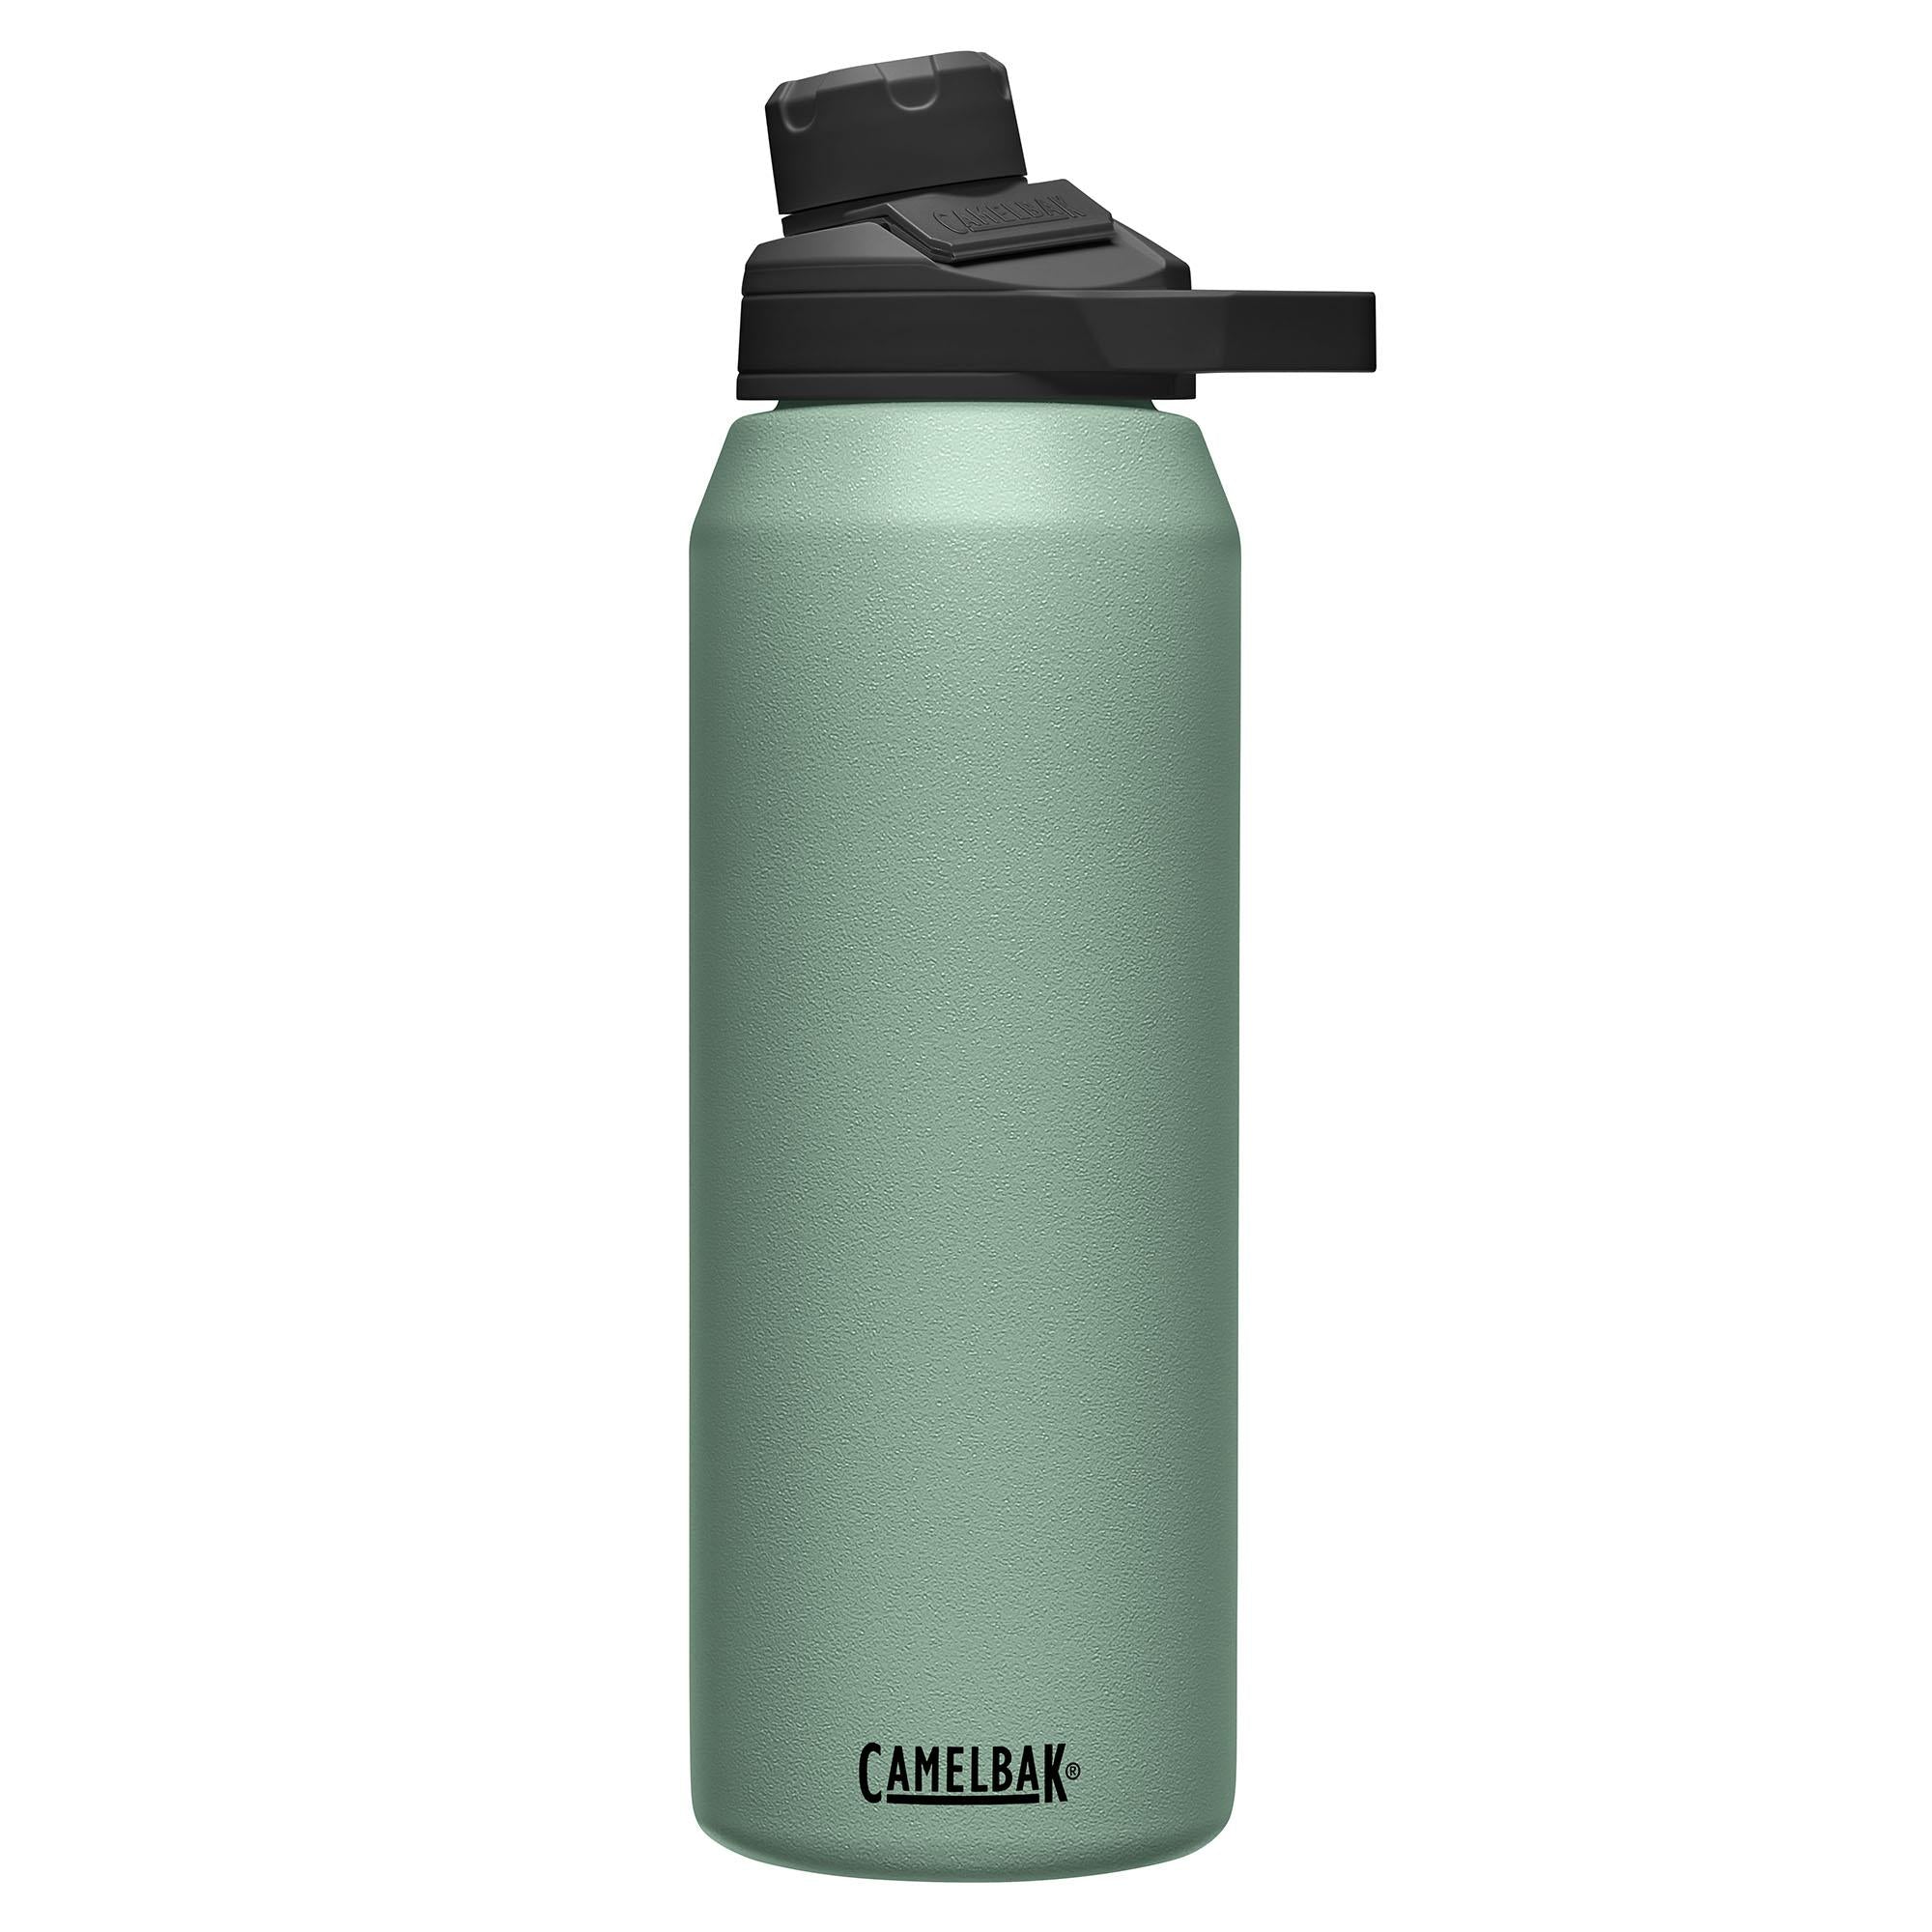 Used Camelbak Stainless Steel Chute Vacuum Insulated Water Bottle